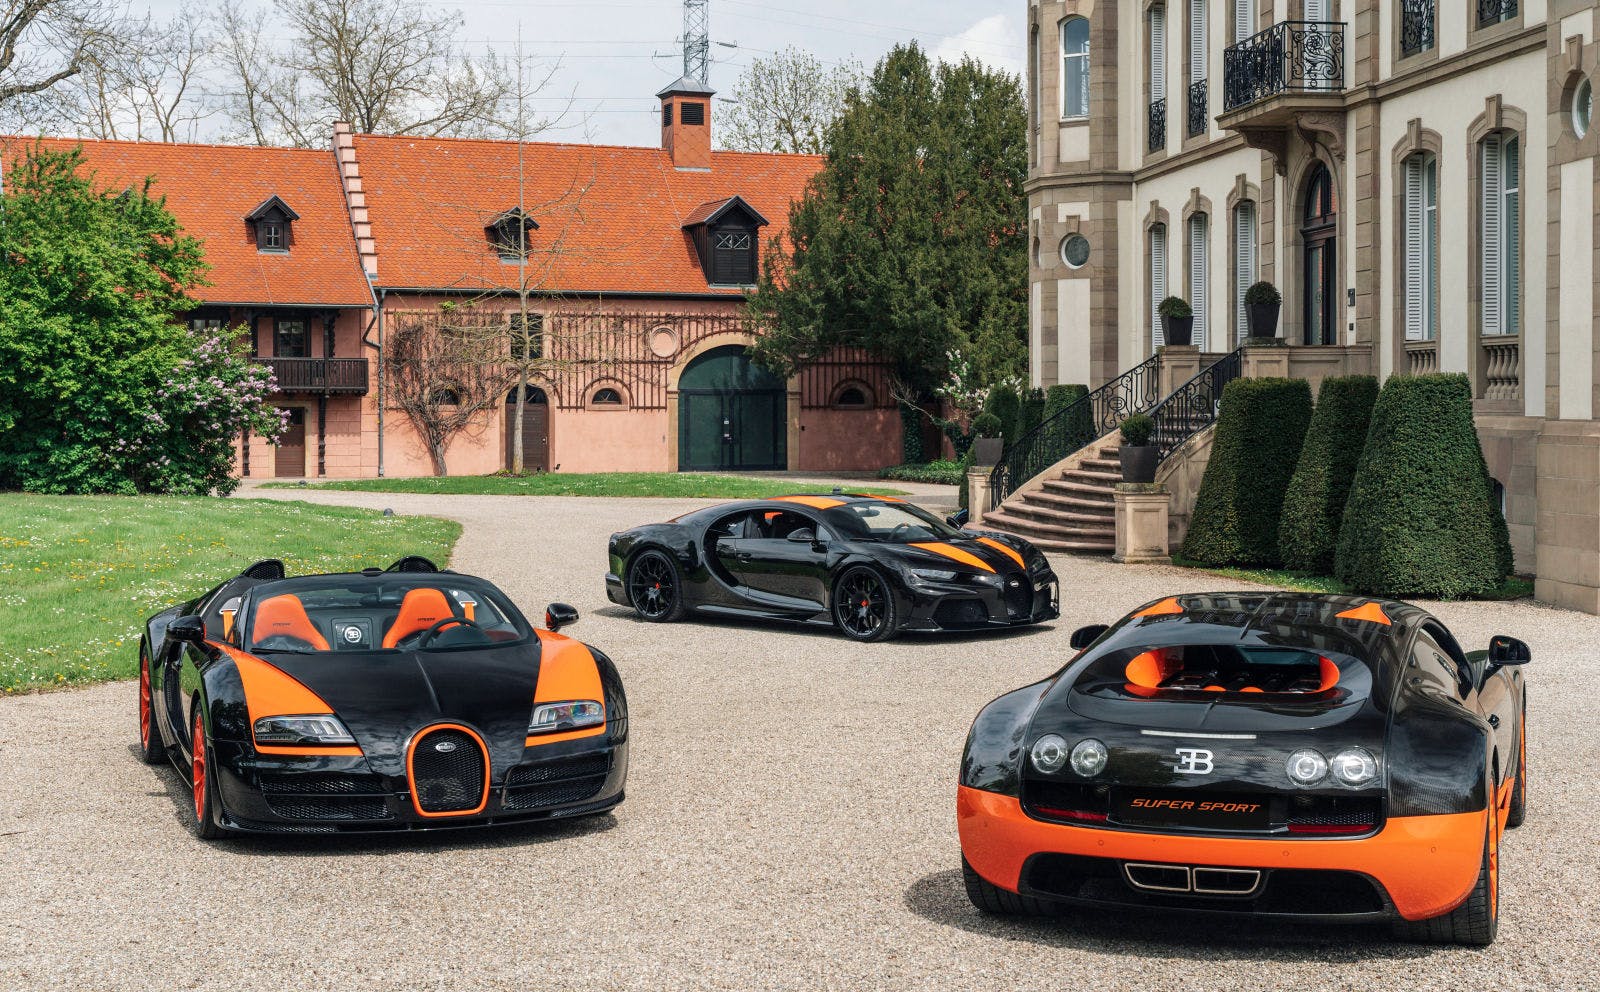 The three very unique world record Bugatti cars visited Molsheim with their owner.